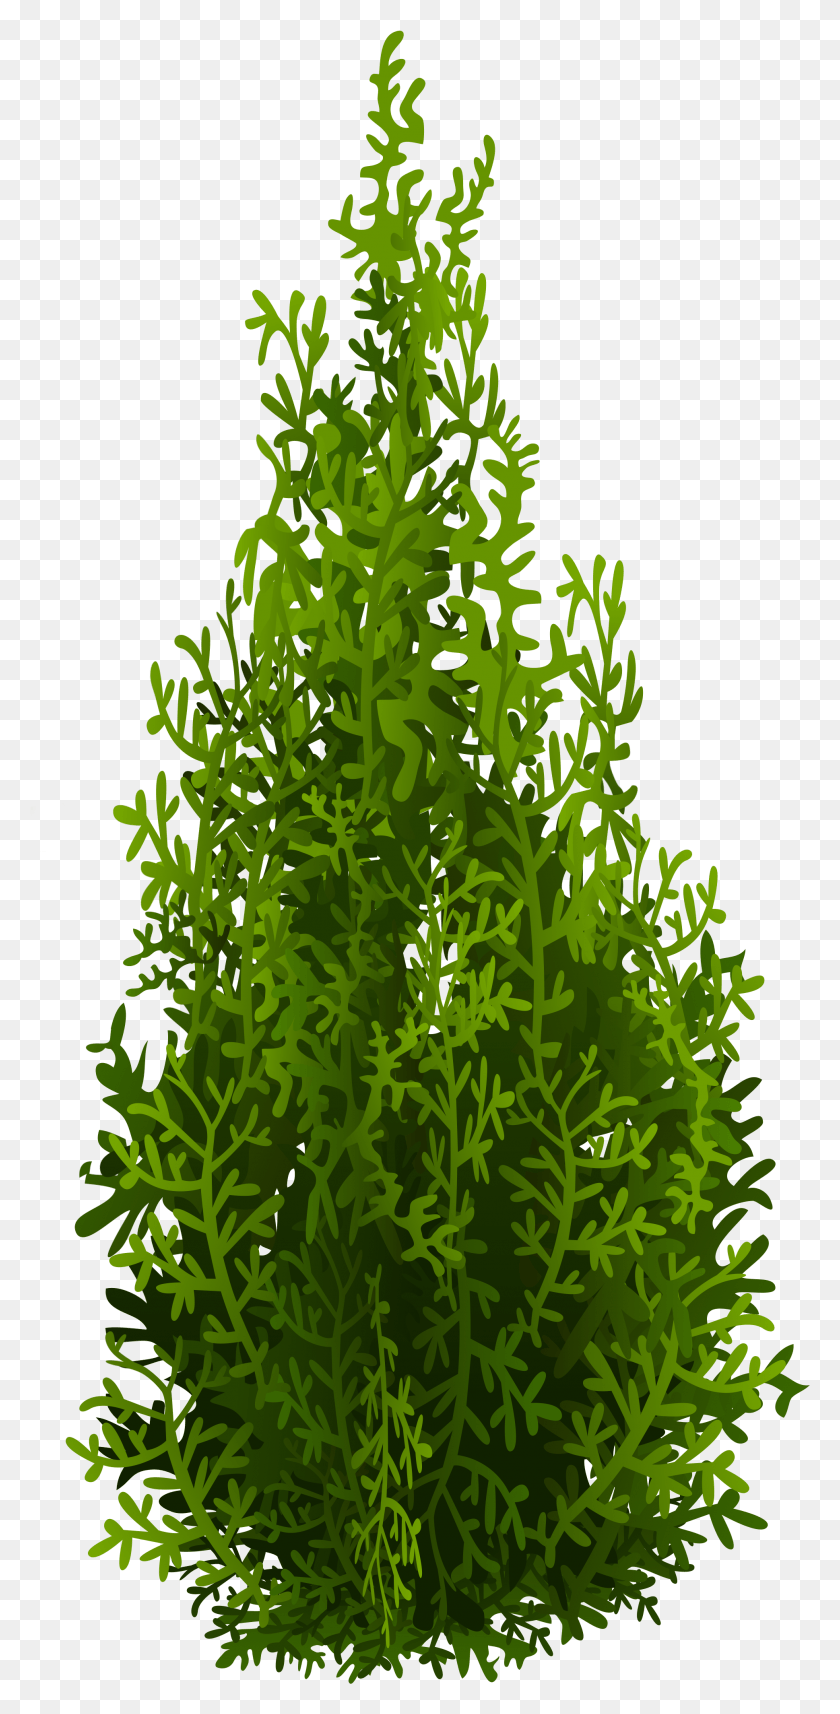 1938x4110 Cypress Picture Gallery Yopriceville High Quality Kiparis, Green, Plant, Tree Png Скачать